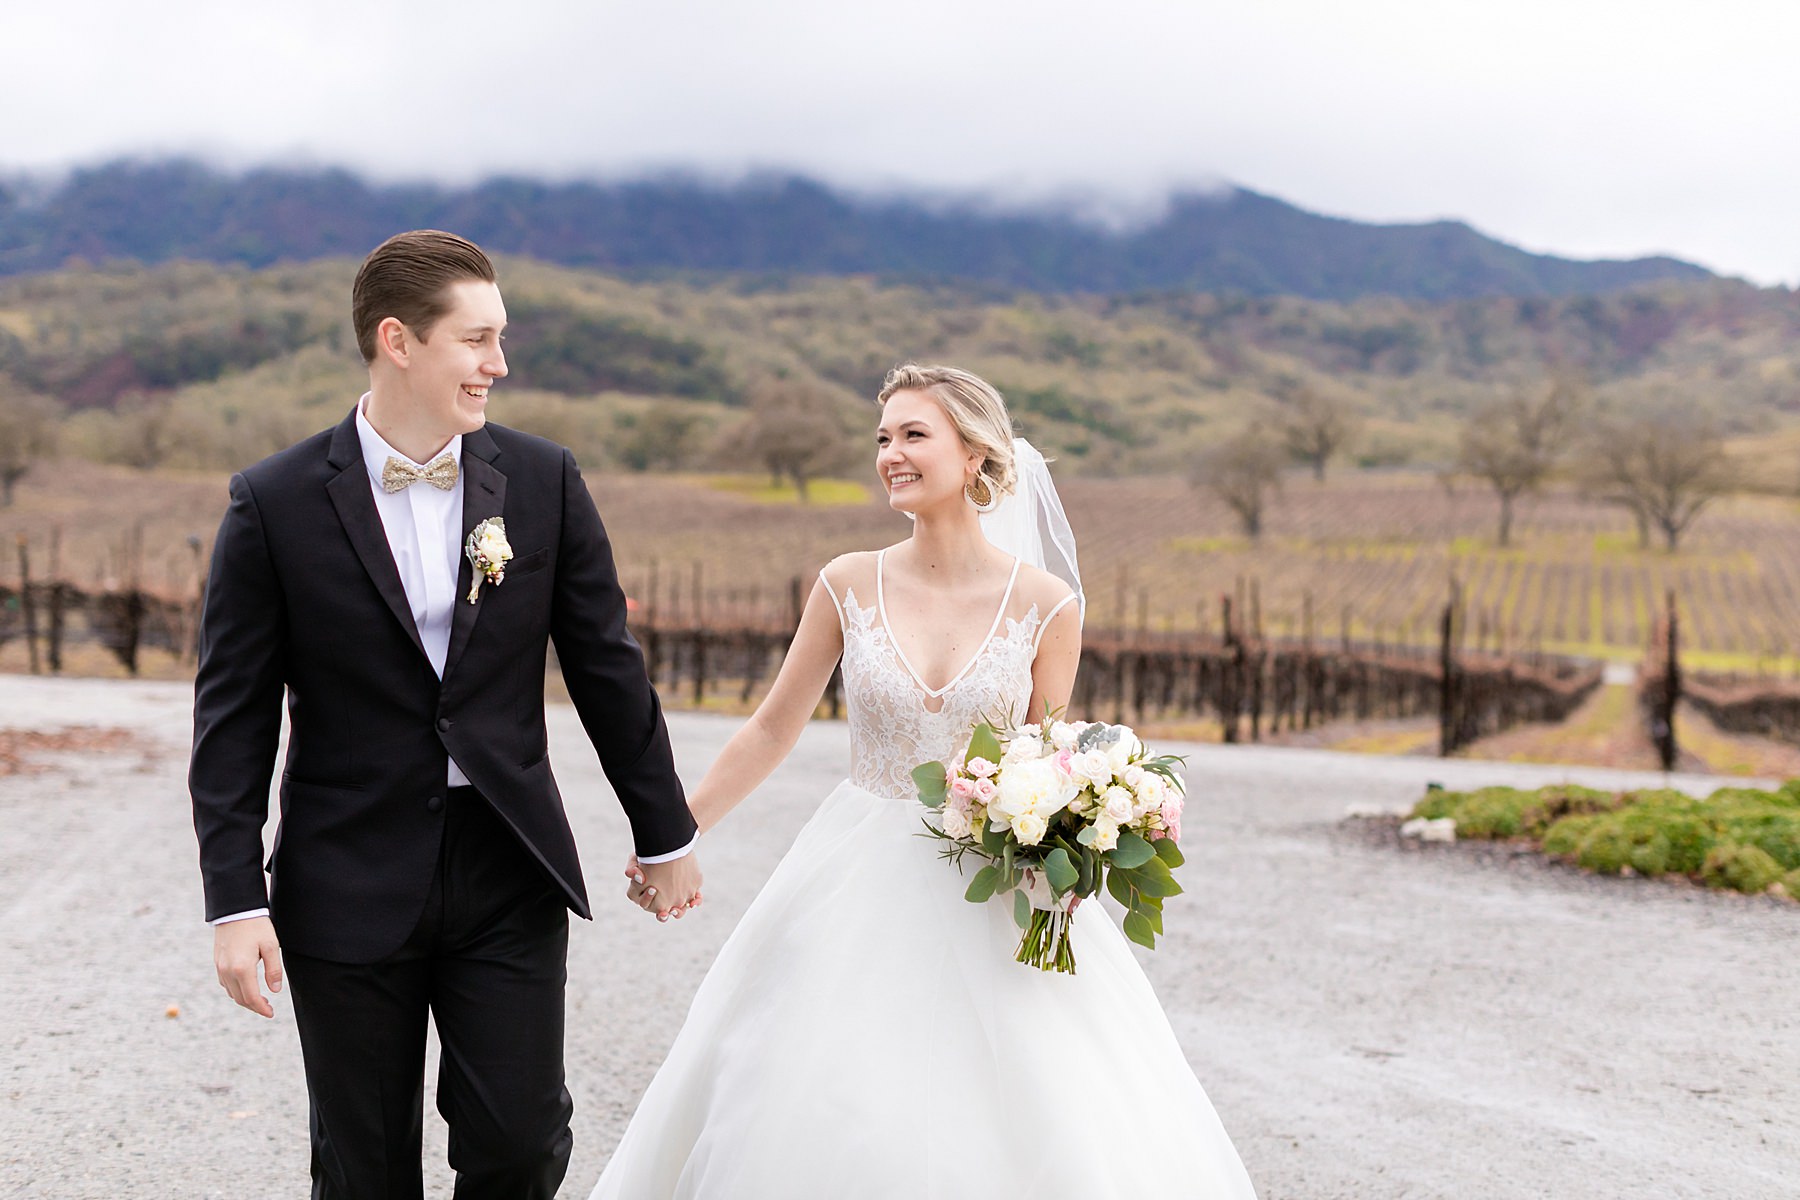 Smiling couple pose for photo on their rainy Oyster Ridge winery wedding day